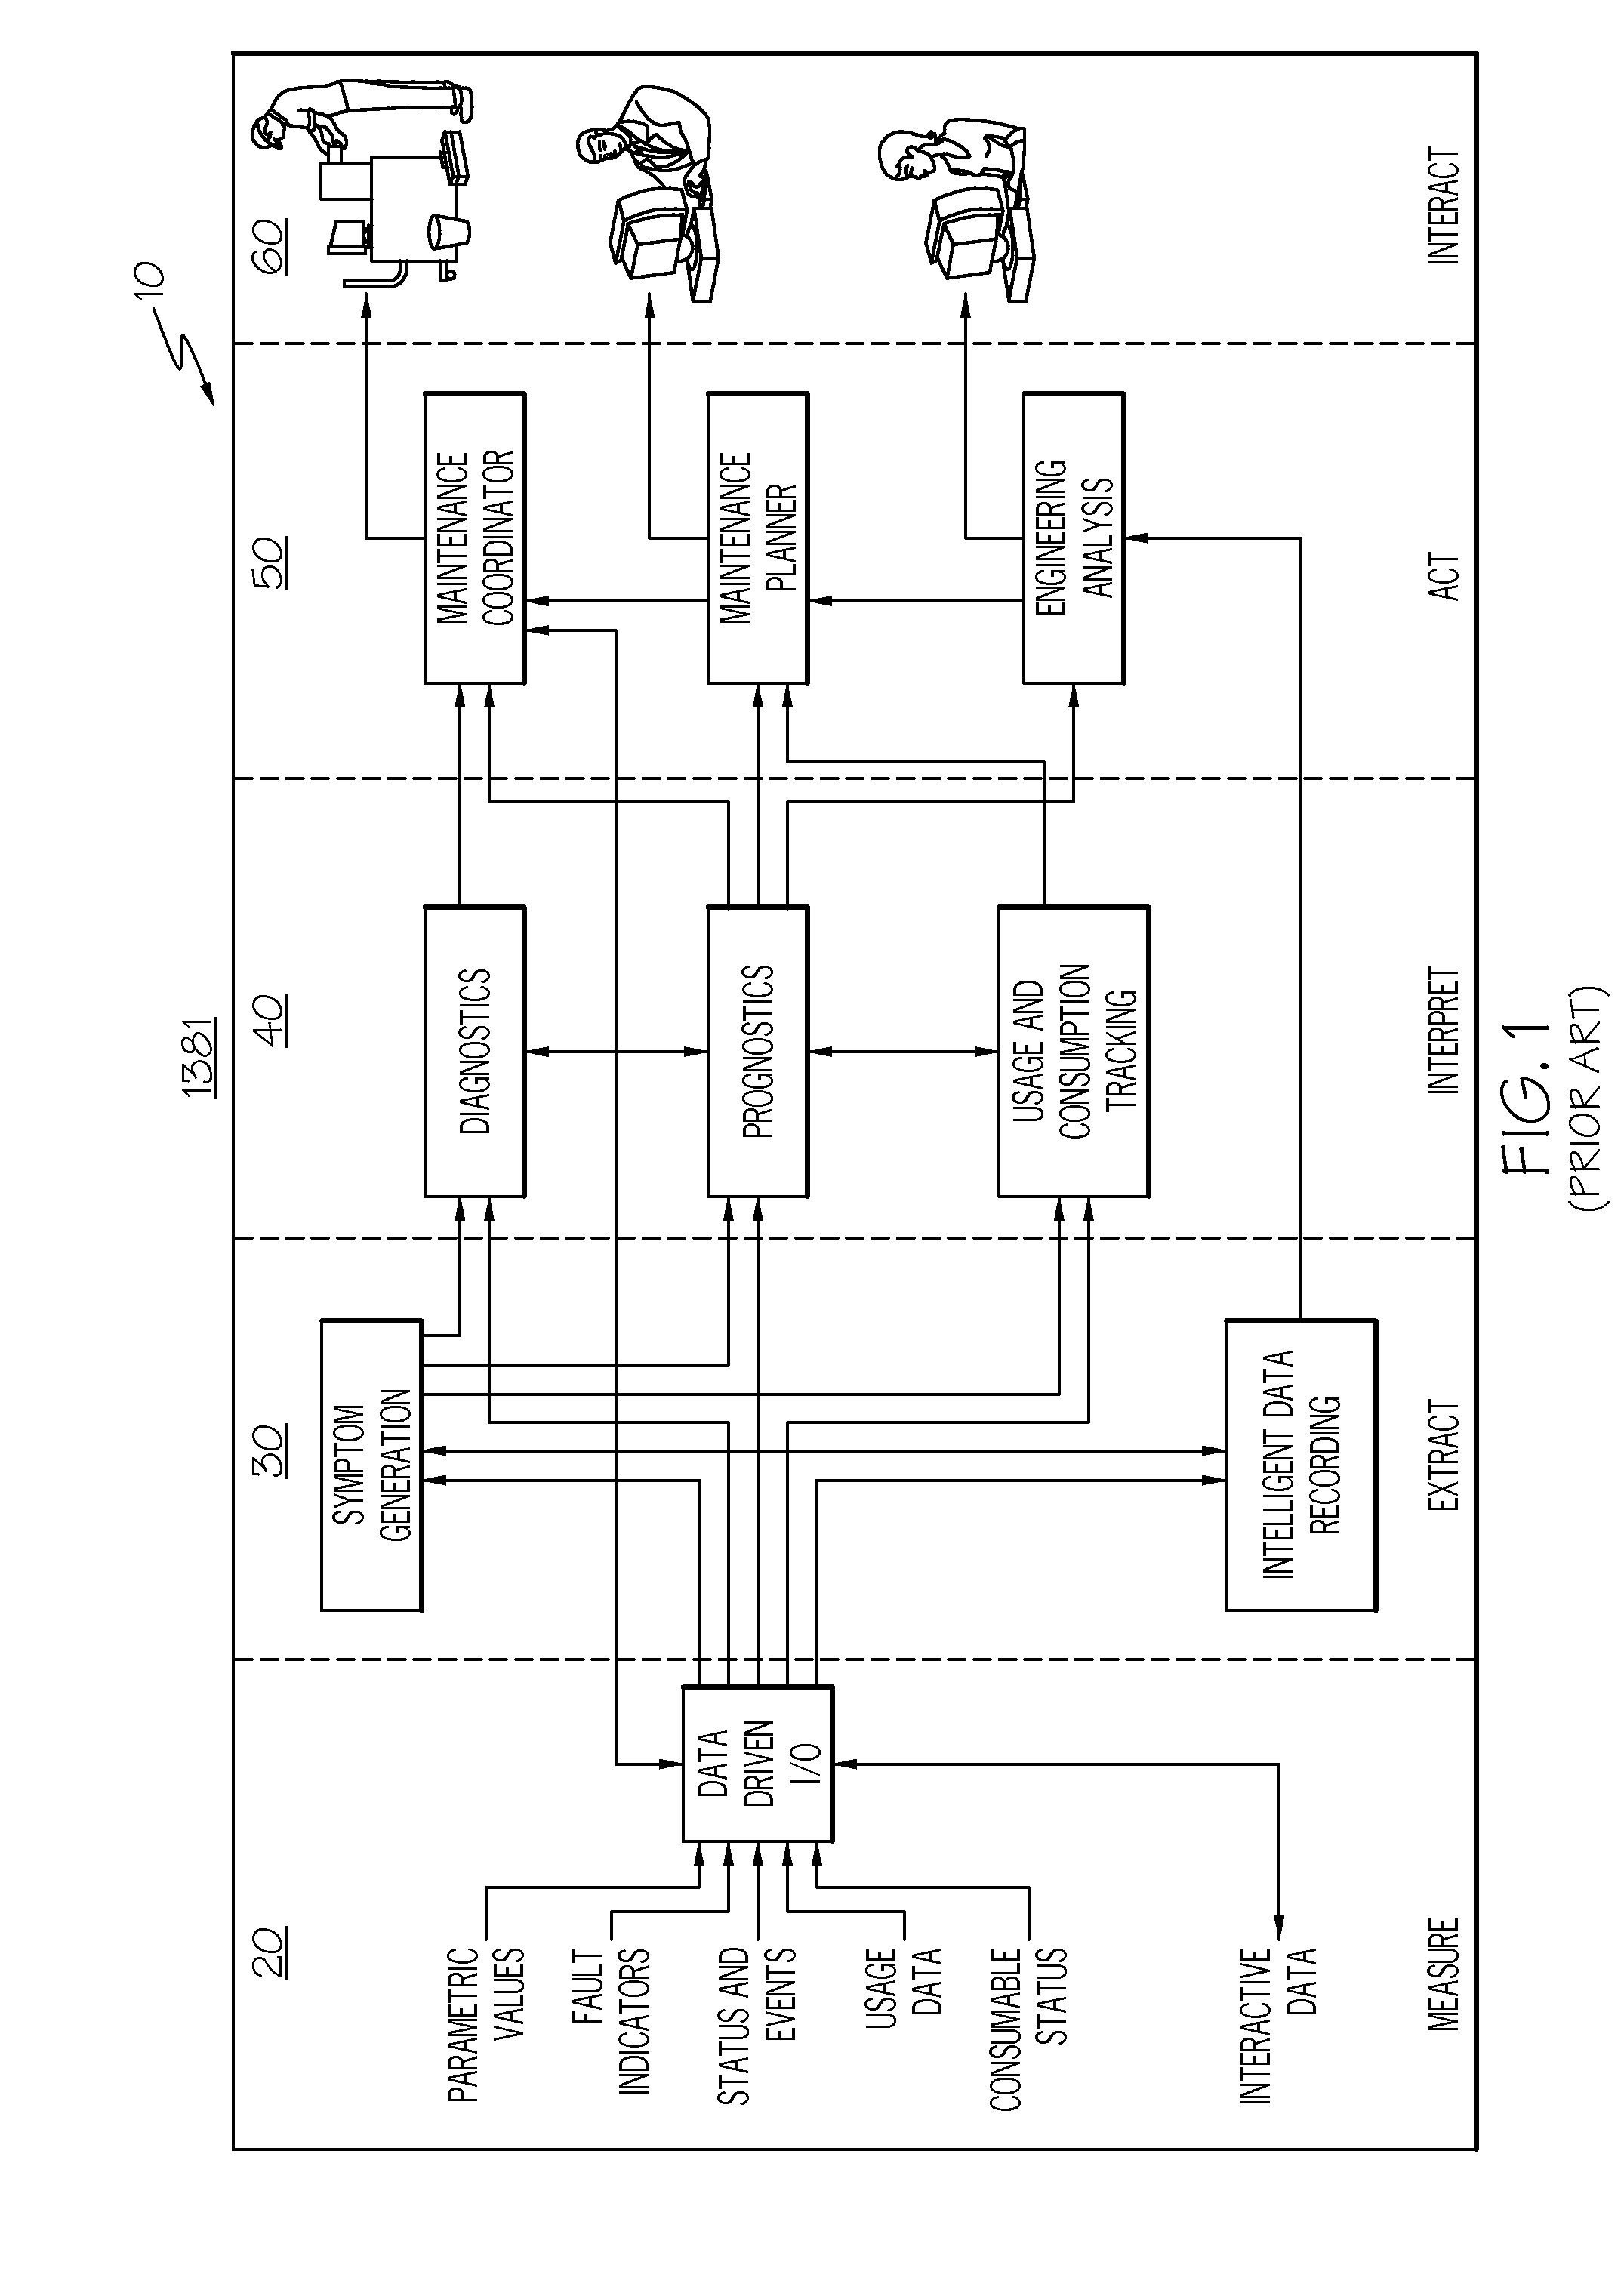 Methods and systems for distributed diagnostic reasoning